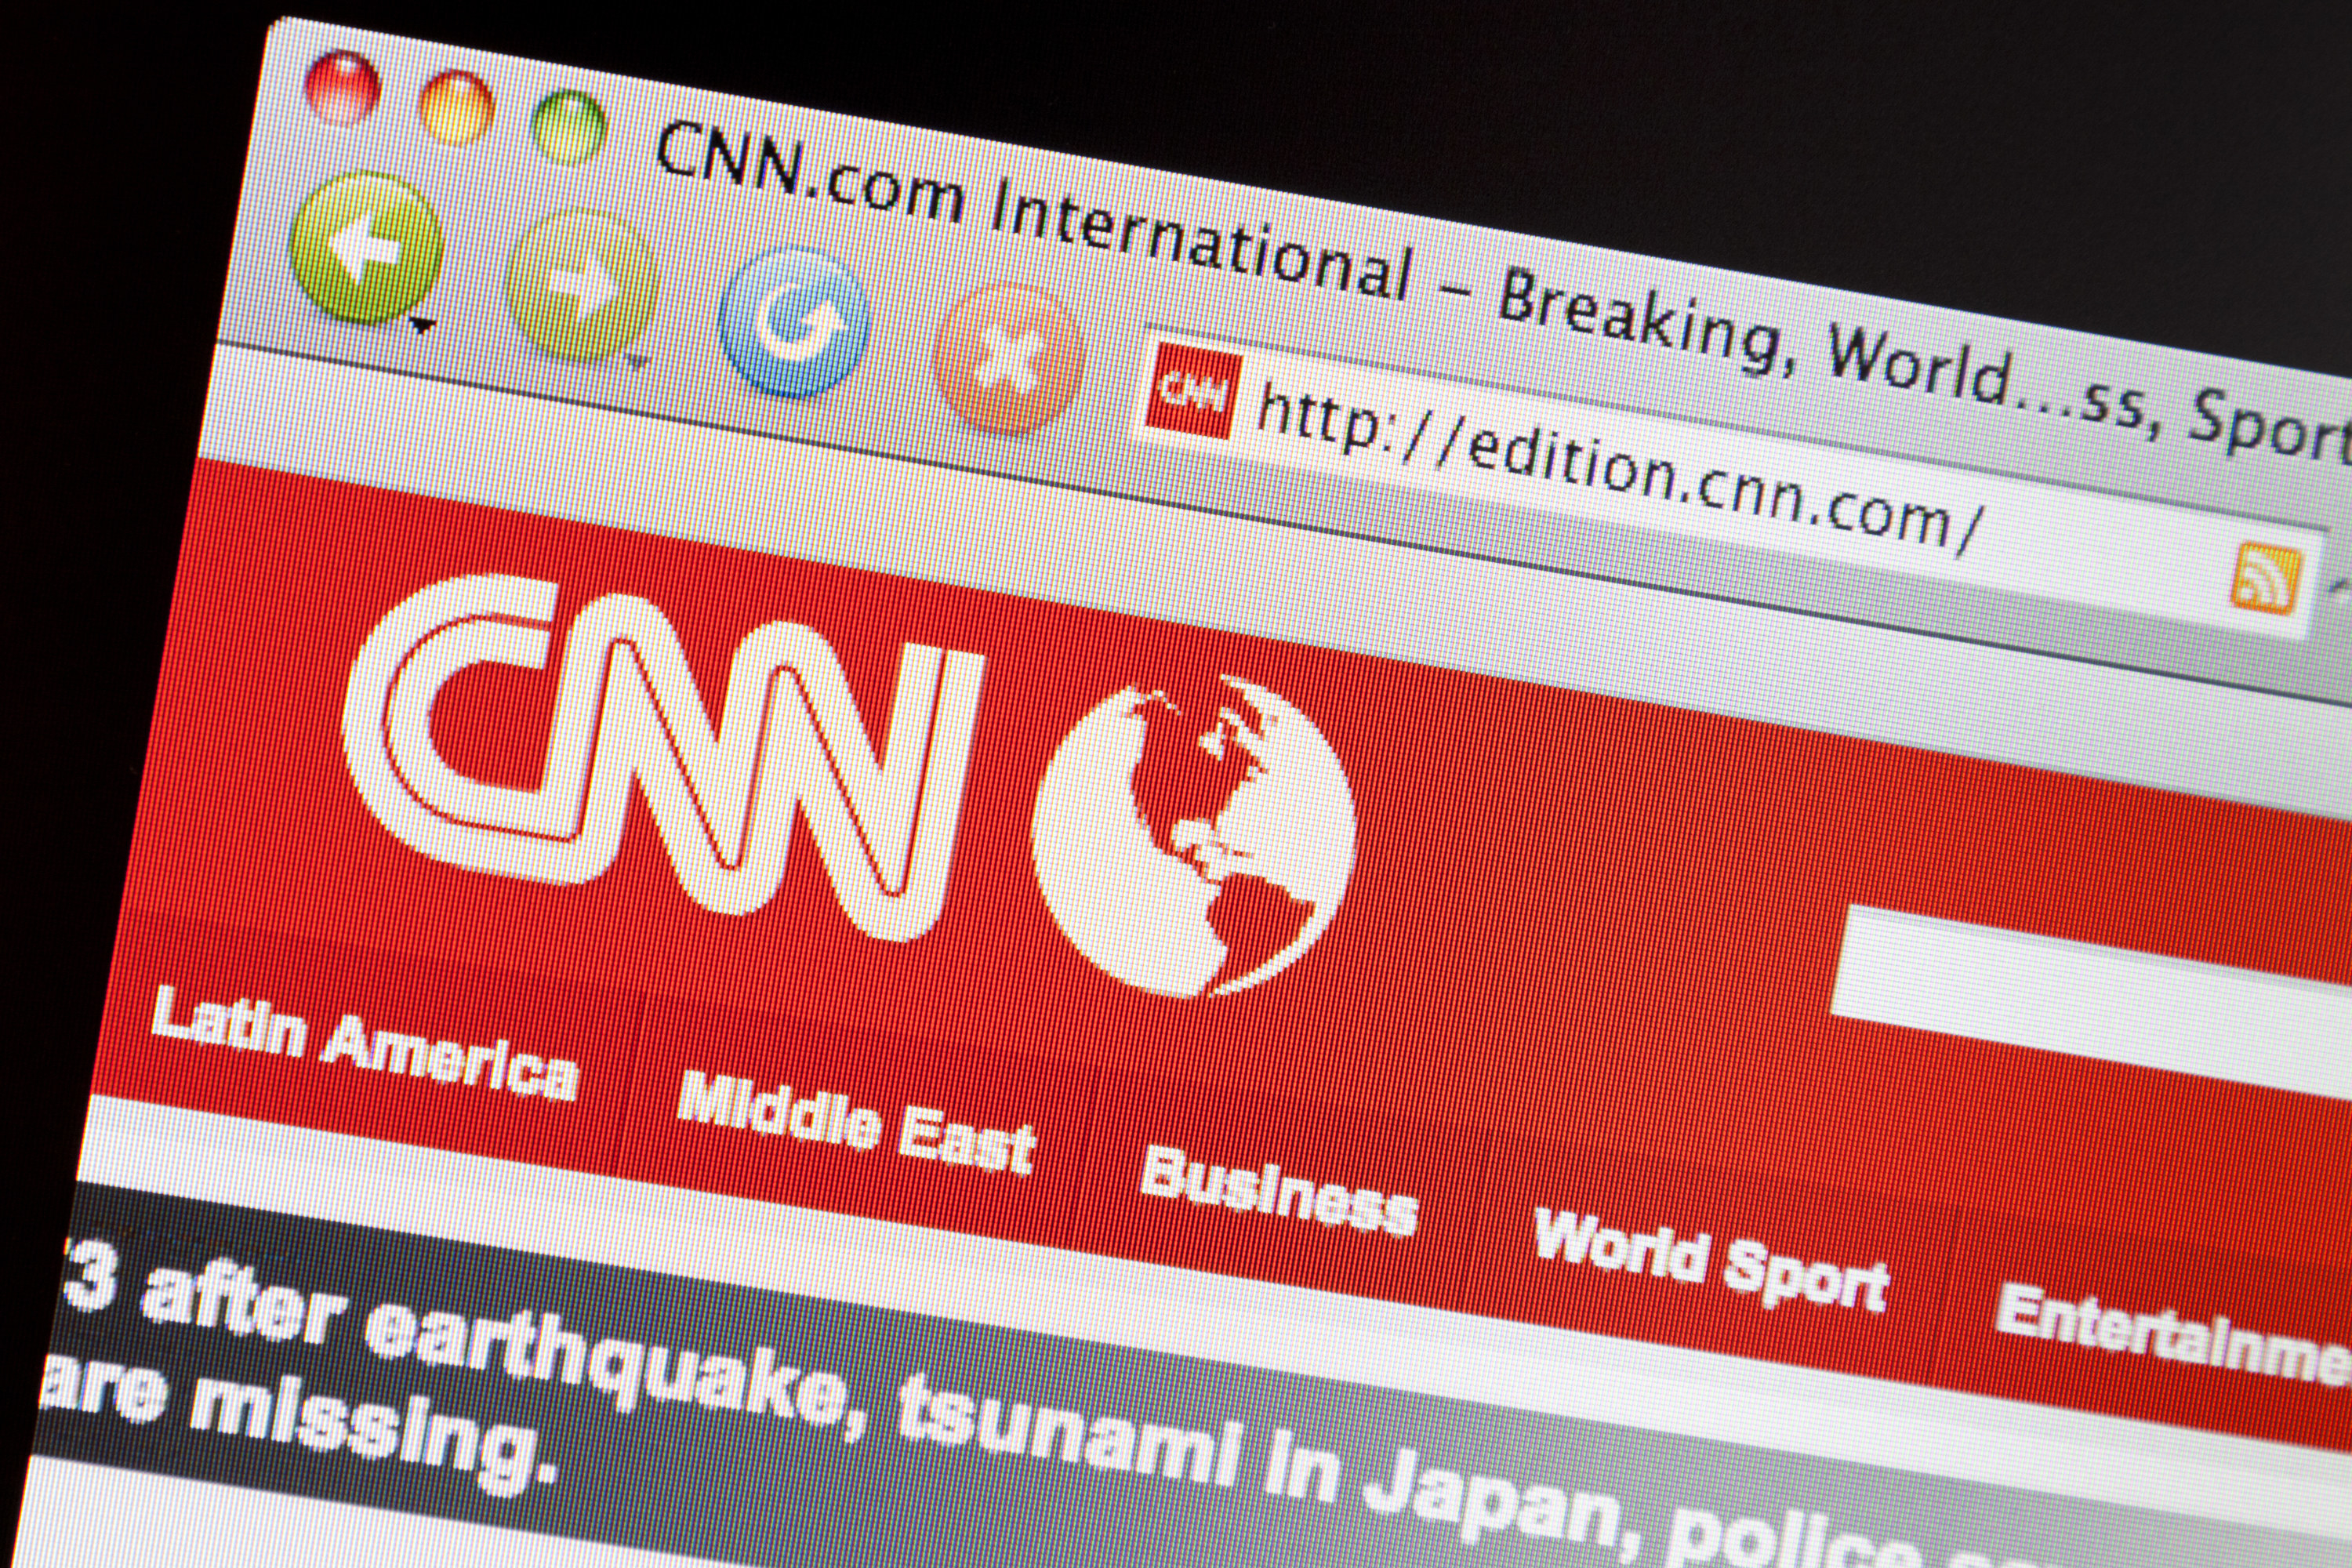 Part of the CNN website, viewed on an LCD screen using the Camino for Mac web browser